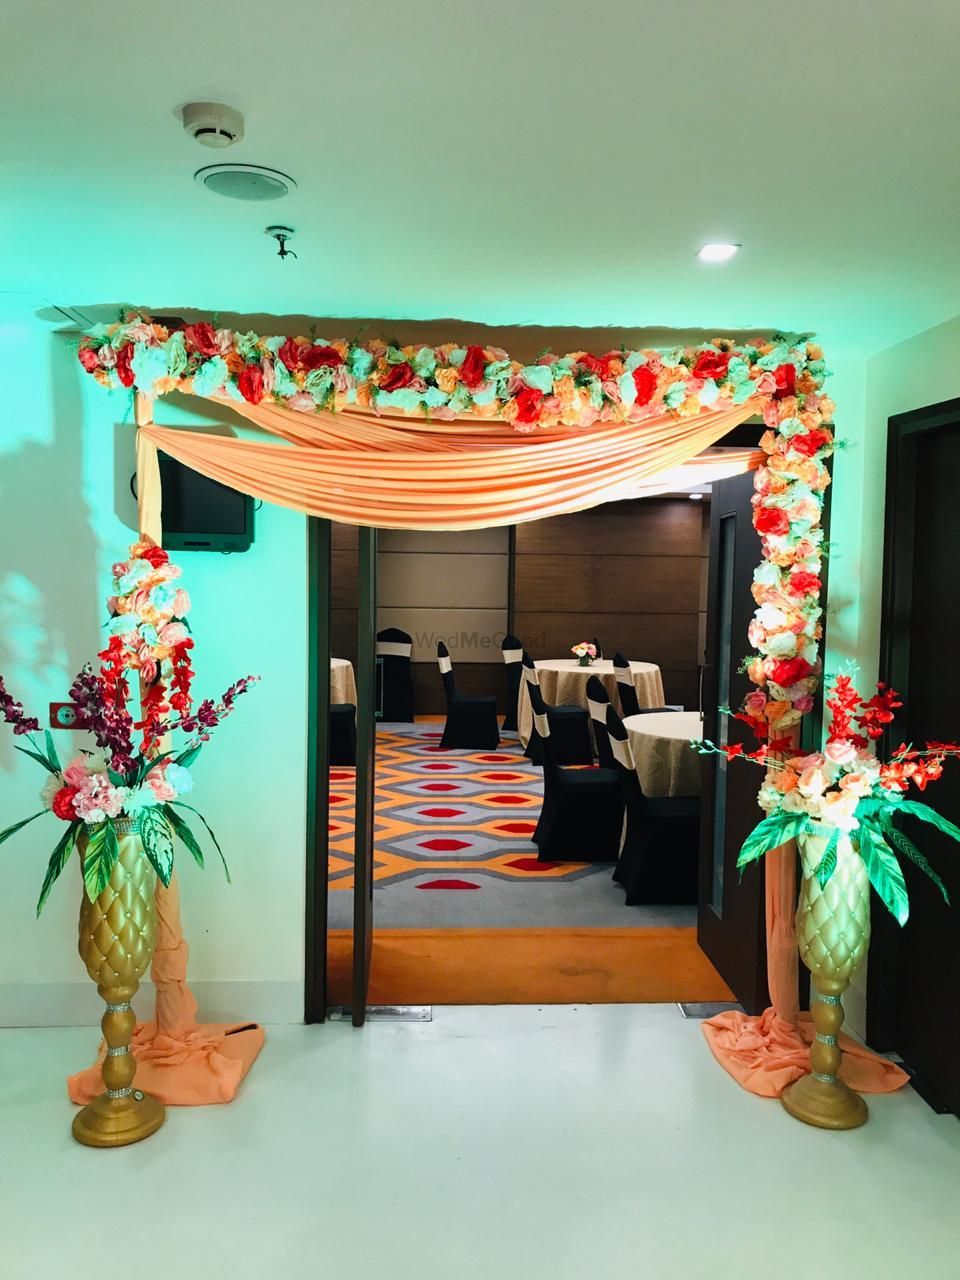 Photo By Golden Tulip - Venues